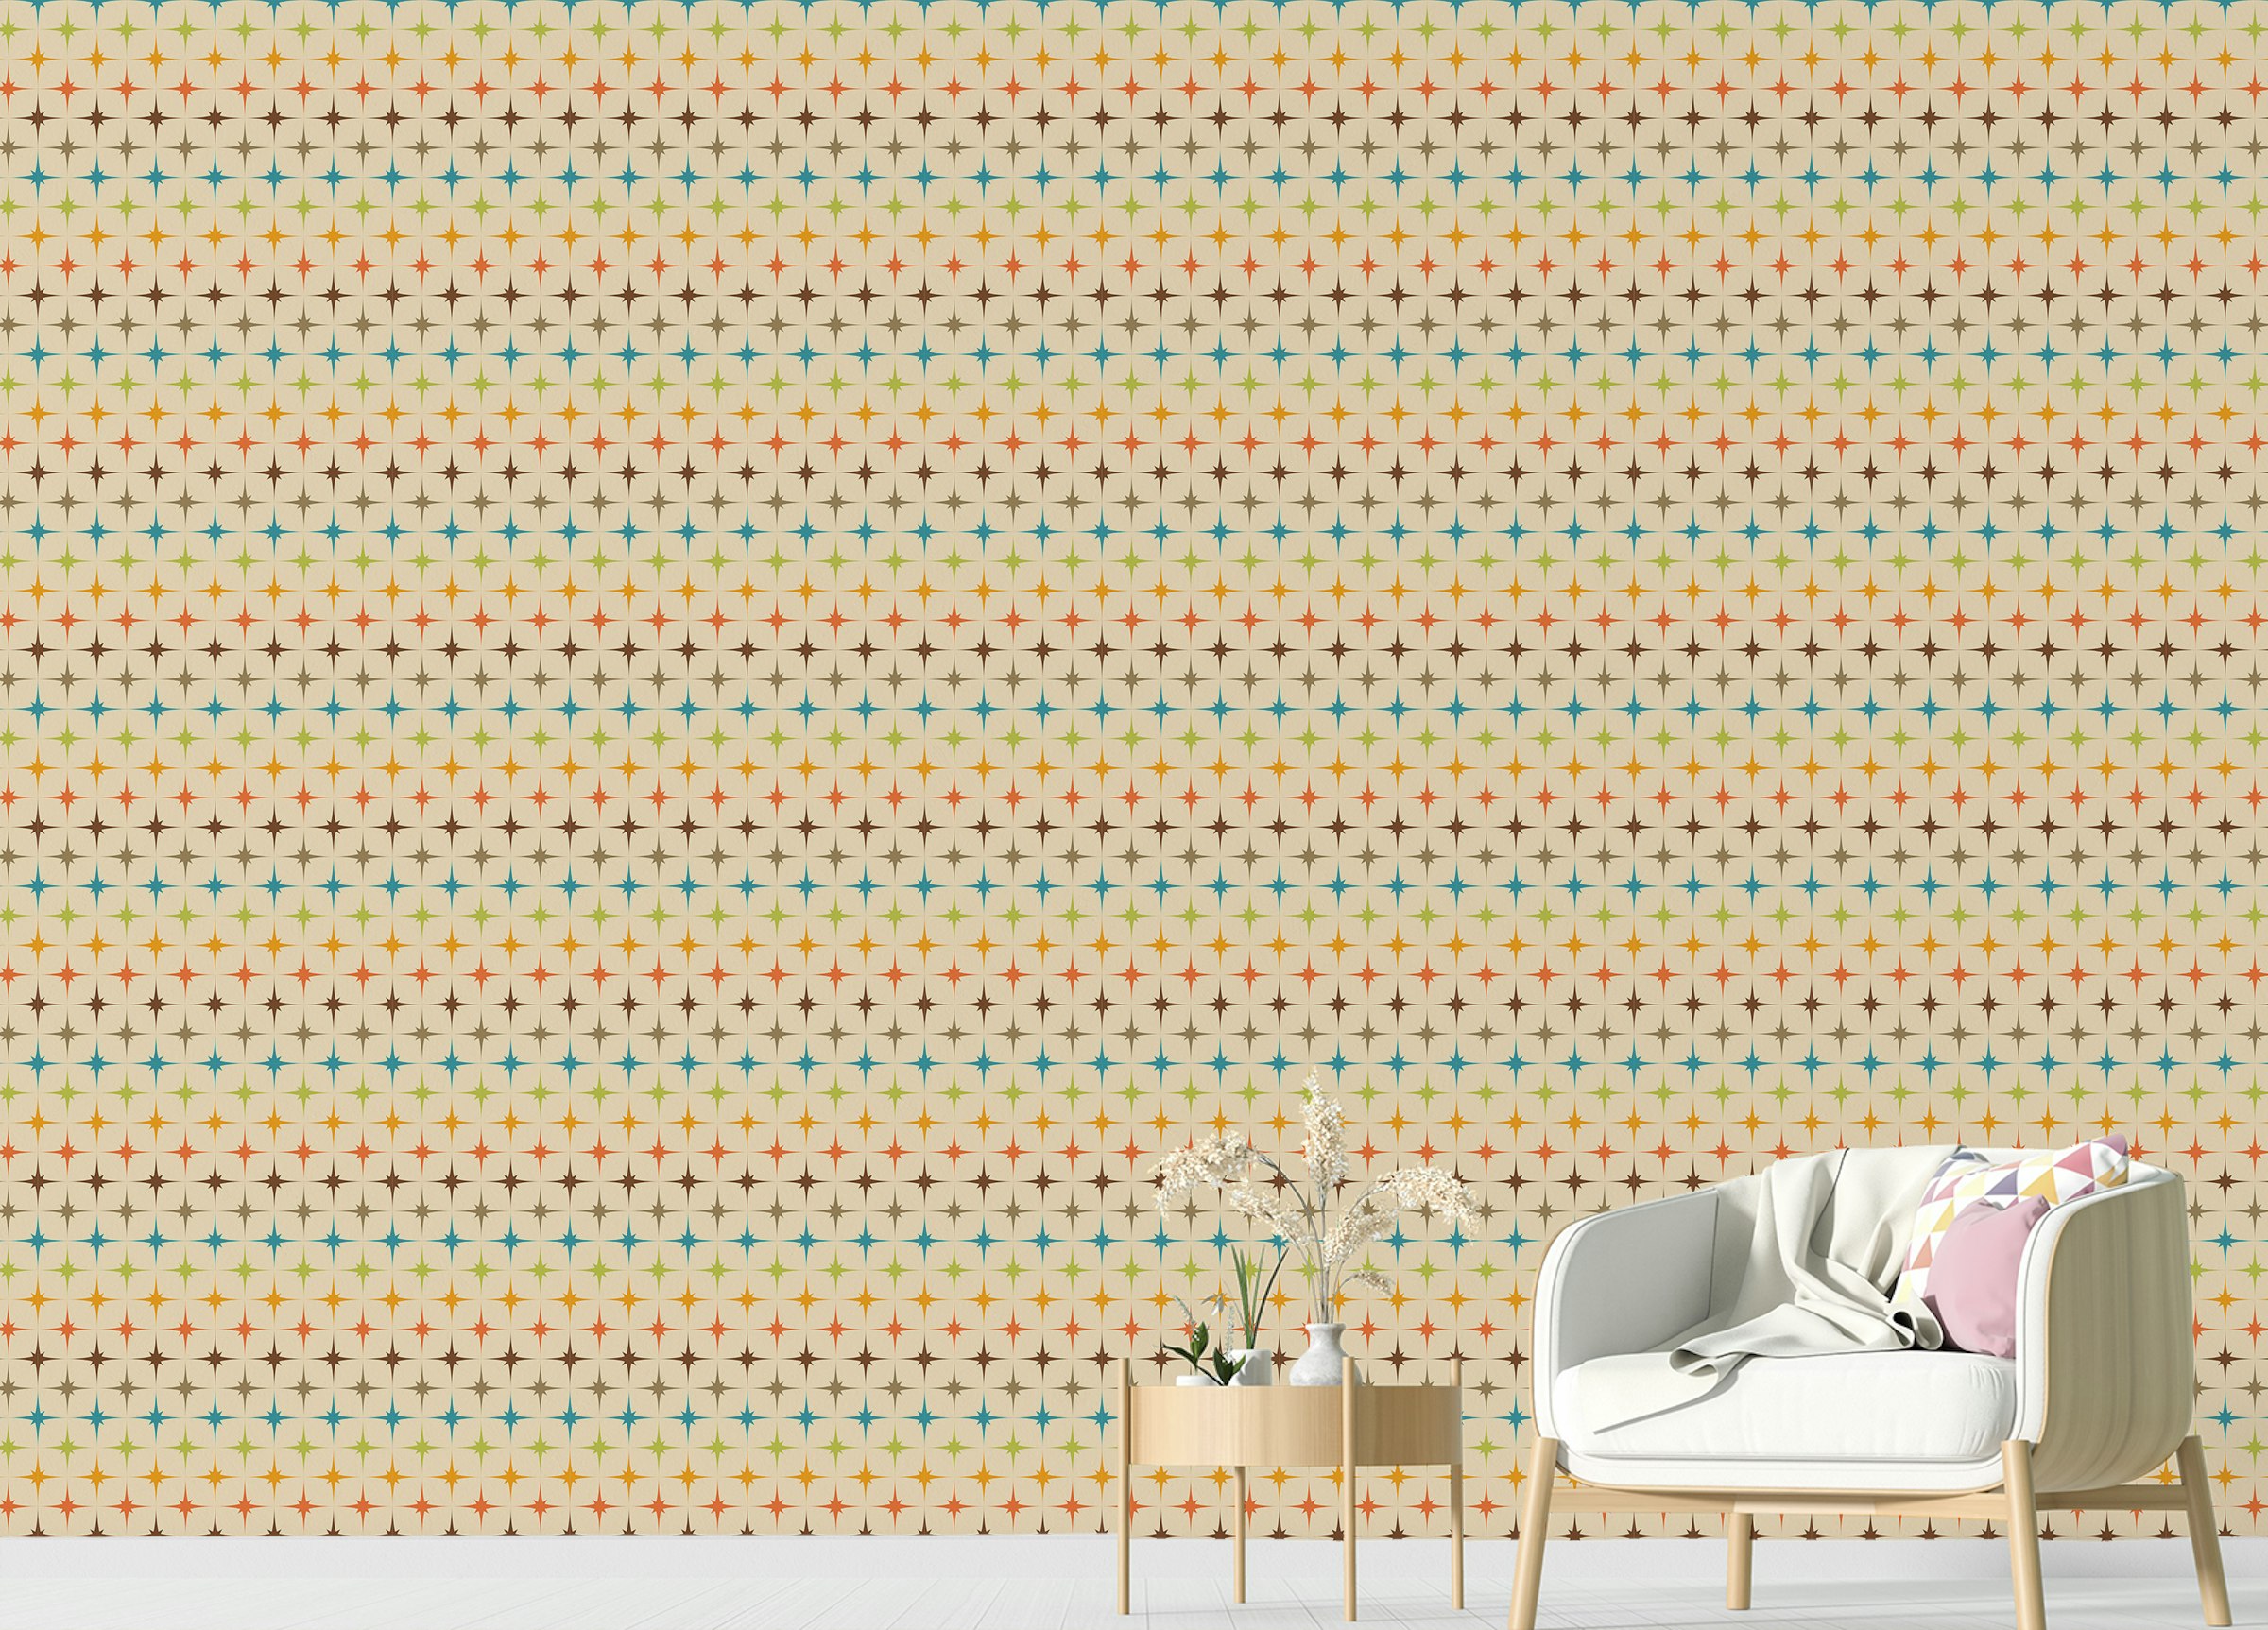 Peel and Stick Colorful Modern Atomic Retro Wallpaper For Walls